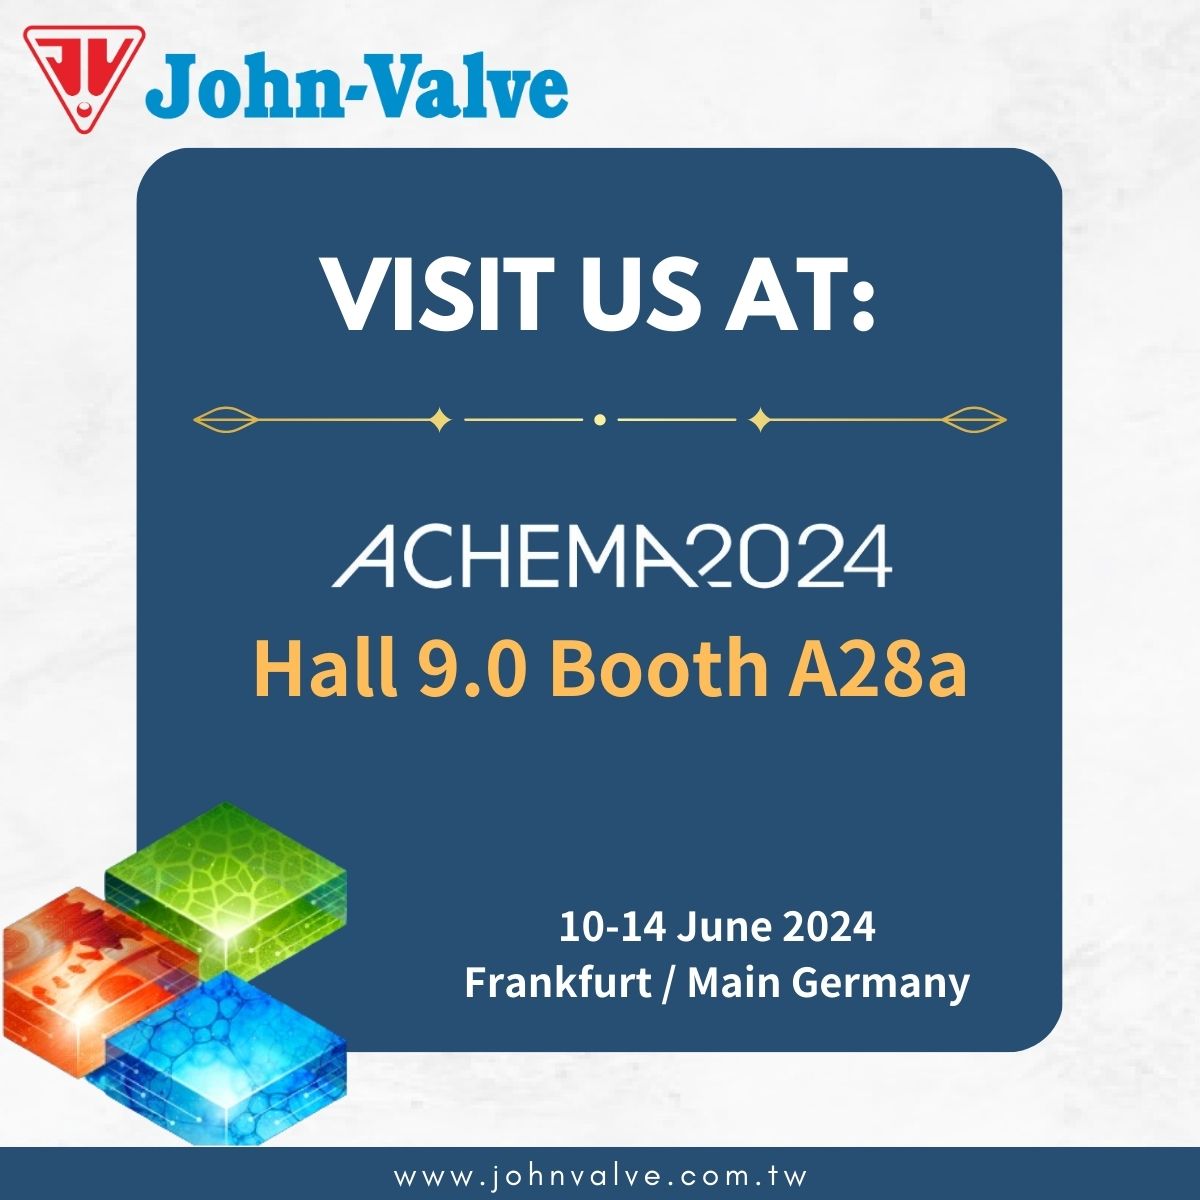 John-Valve is glad to announce our attendance at ACHEMA2024 in Frankfurt 